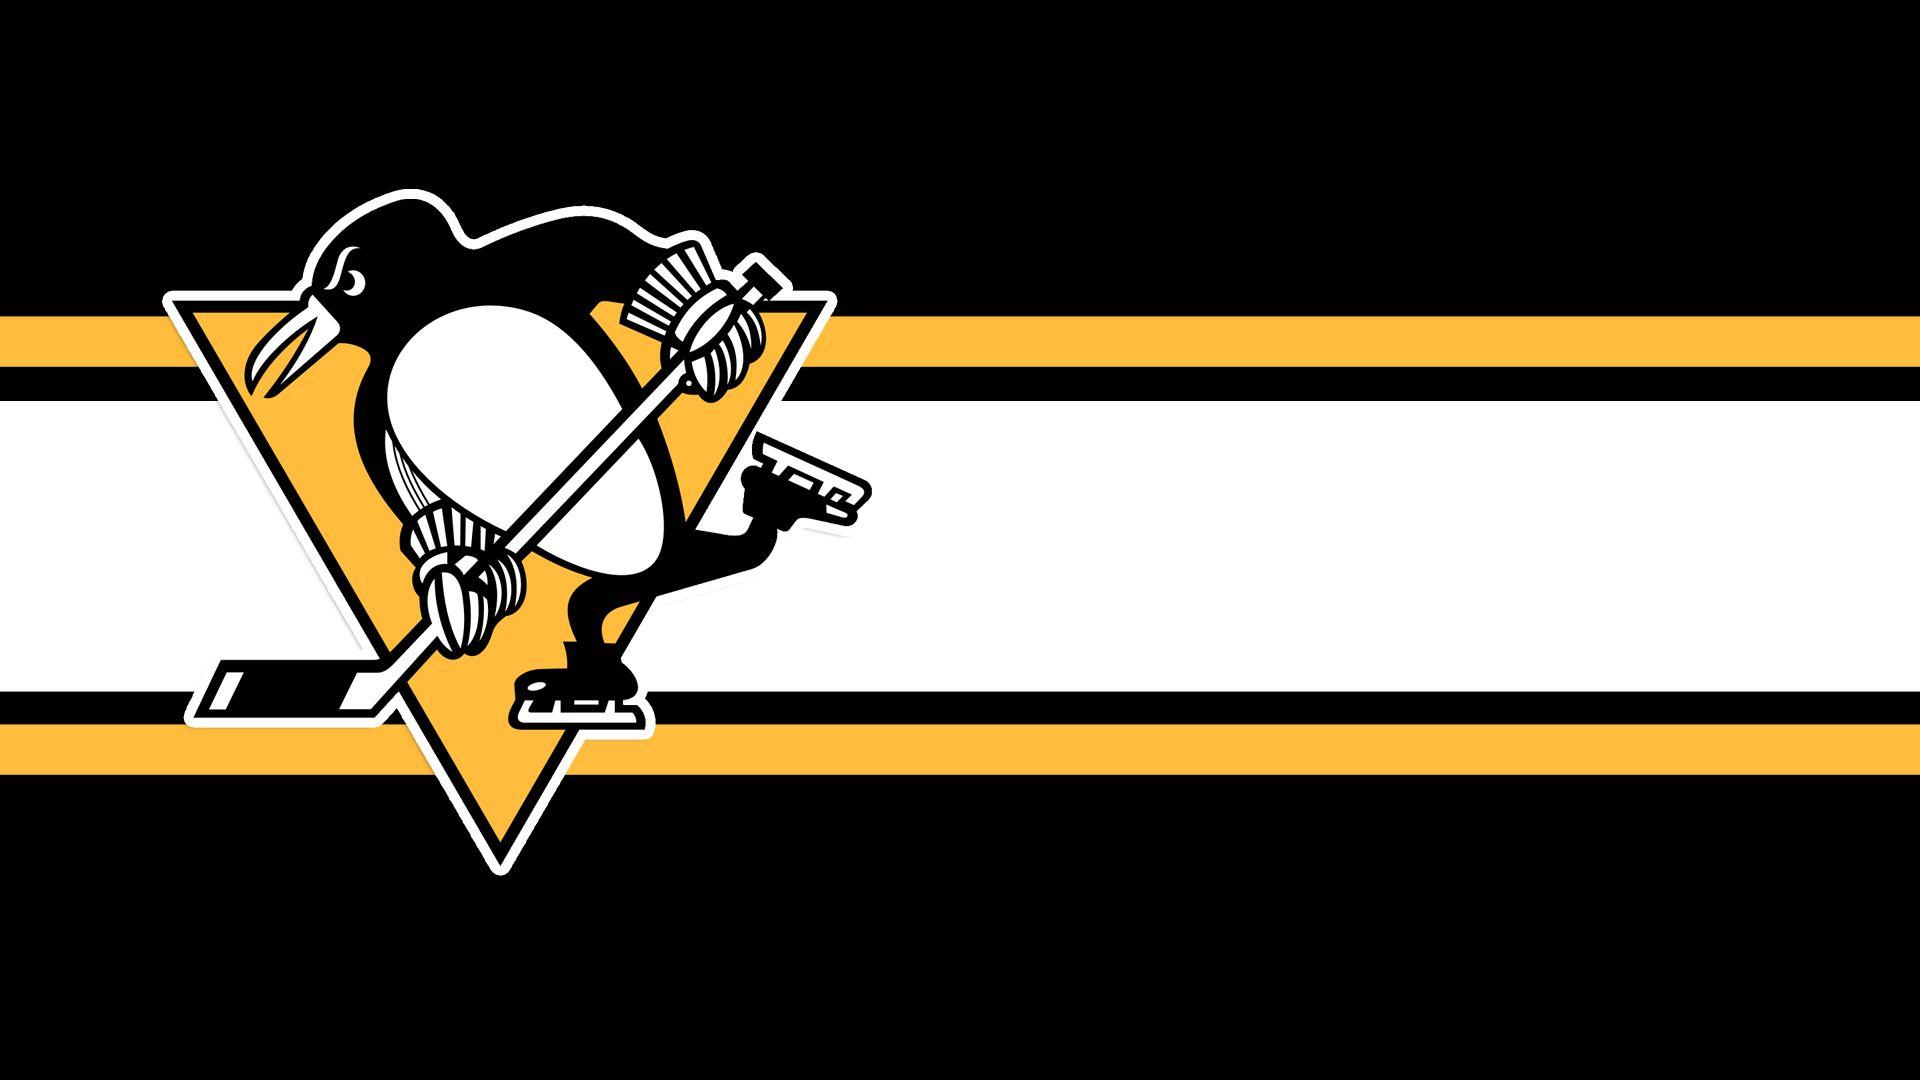 Pittsburgh Penguins Logo - Images Pittsburgh Penguins Logo Wallpapers. | House ideas ...